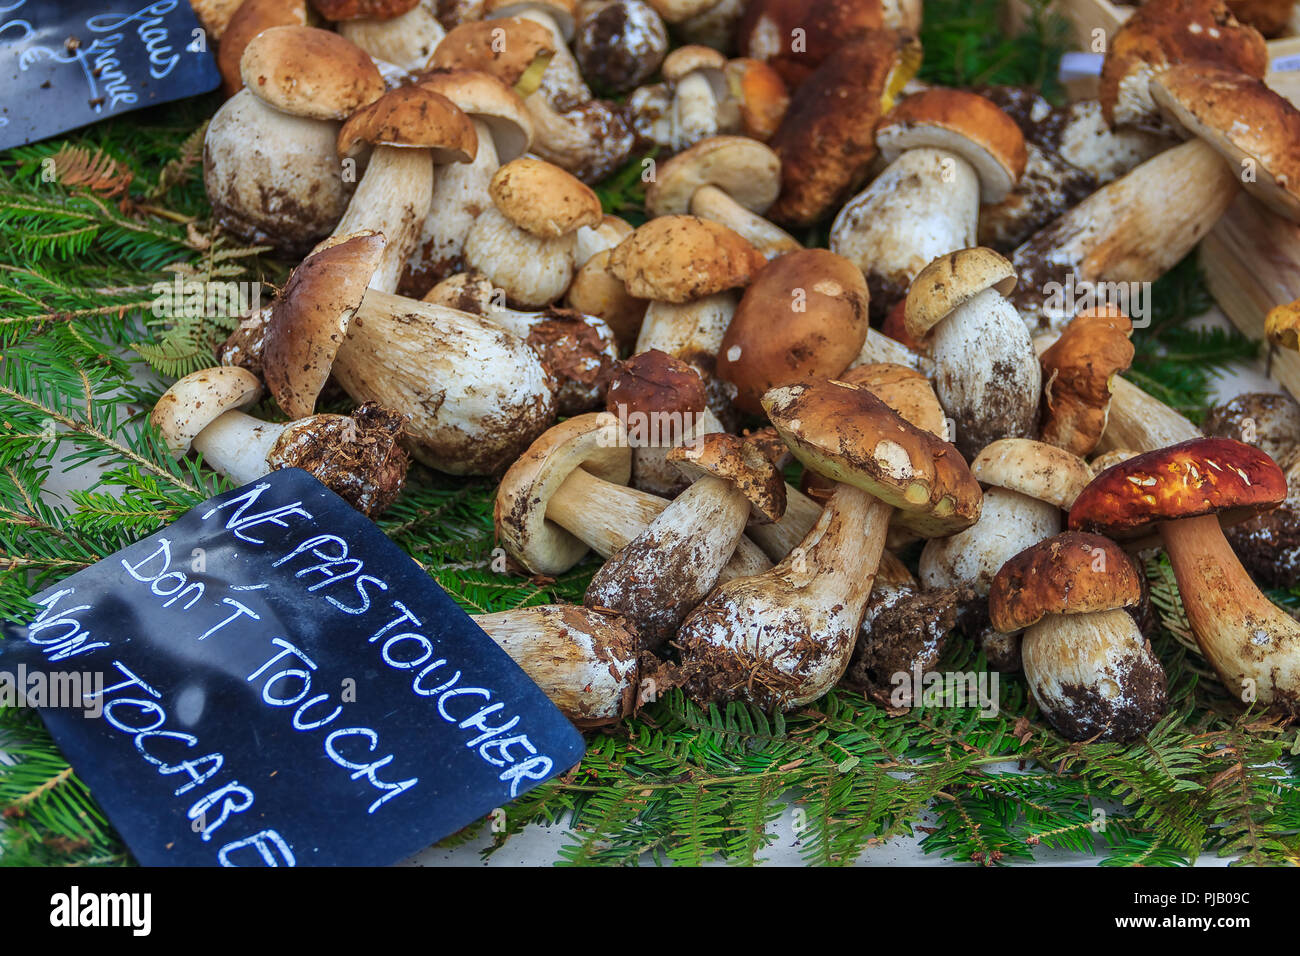 Wild porcini on fern fronds on display at the farmers market in Nice France with a warning sing that says 'Do not touch' Stock Photo